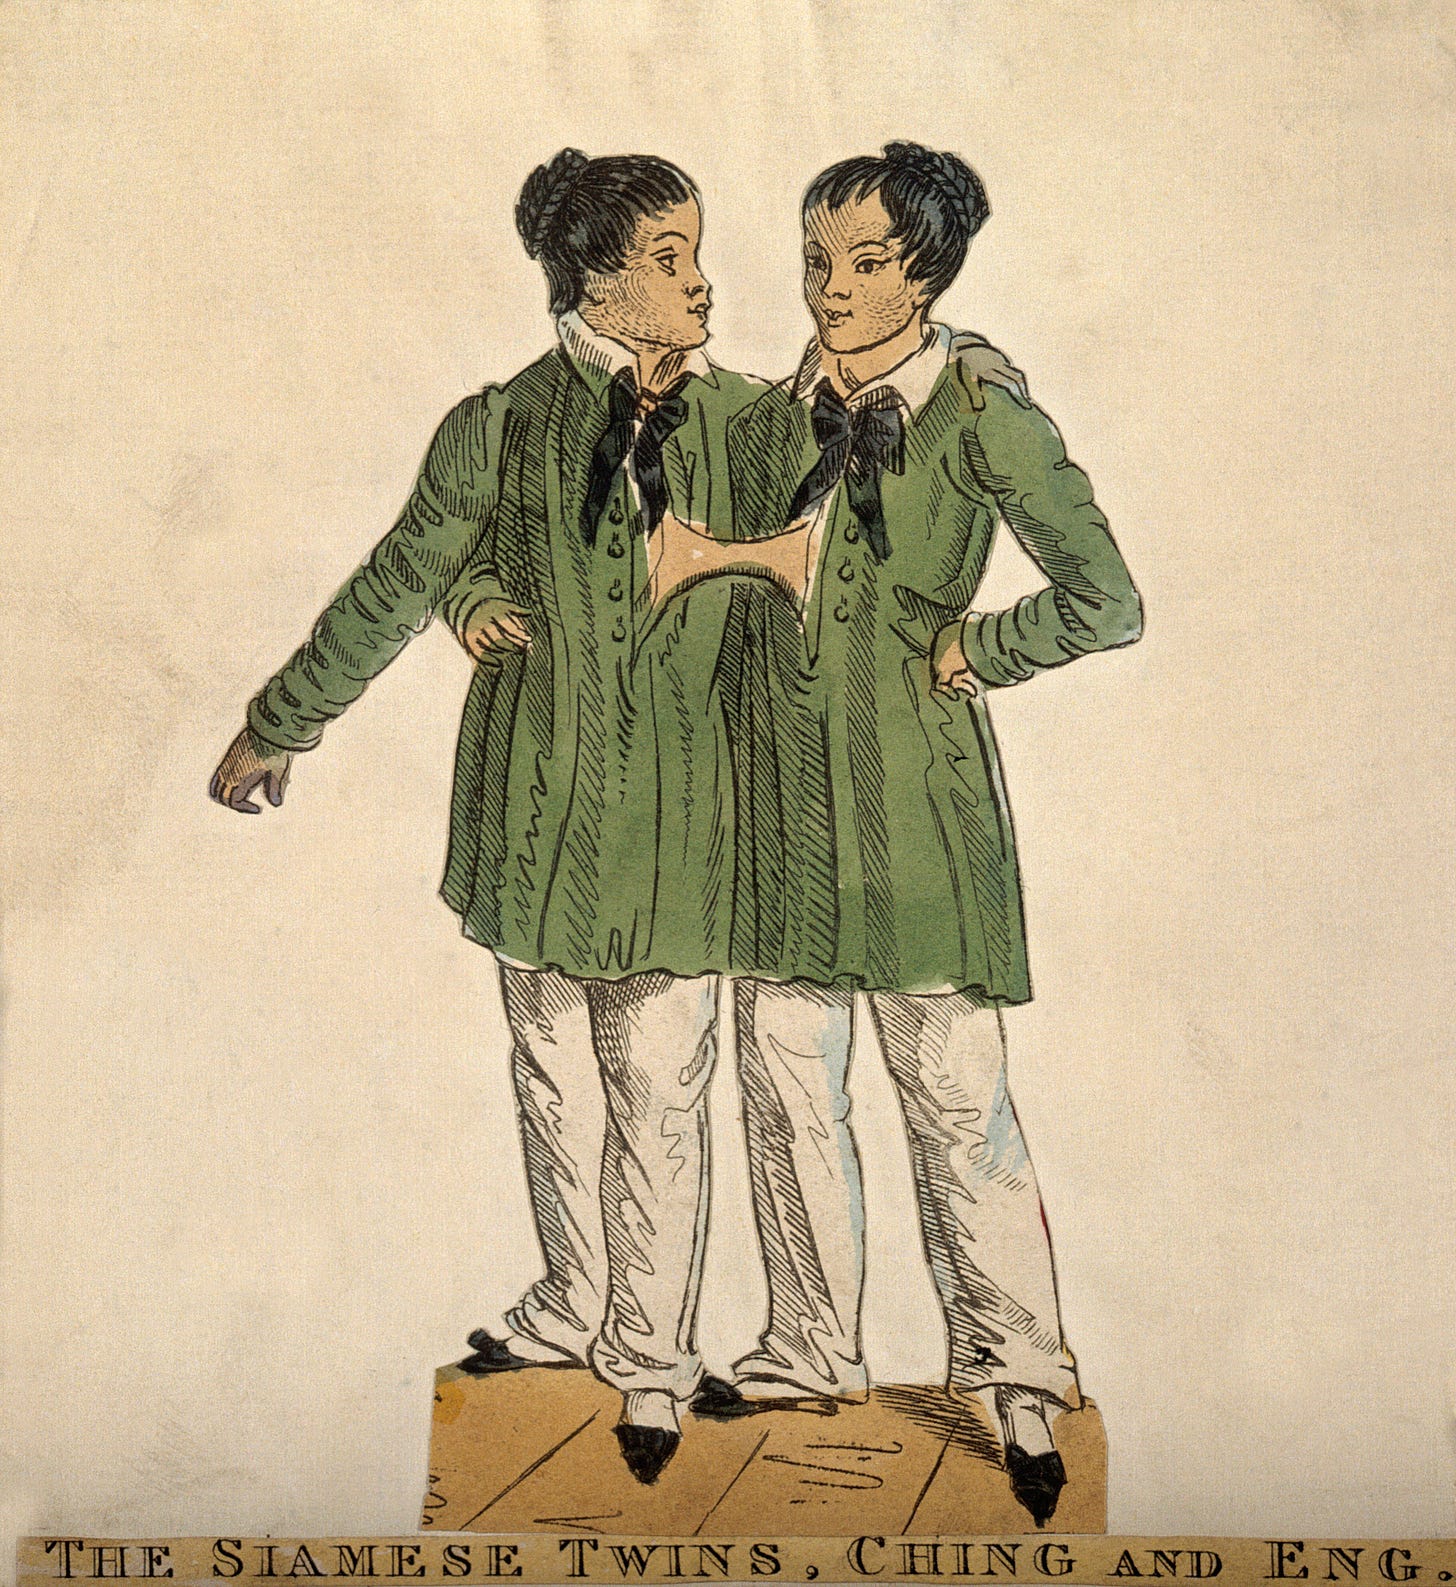 Old colour print of the original 'siamese twins' Chang and Eng